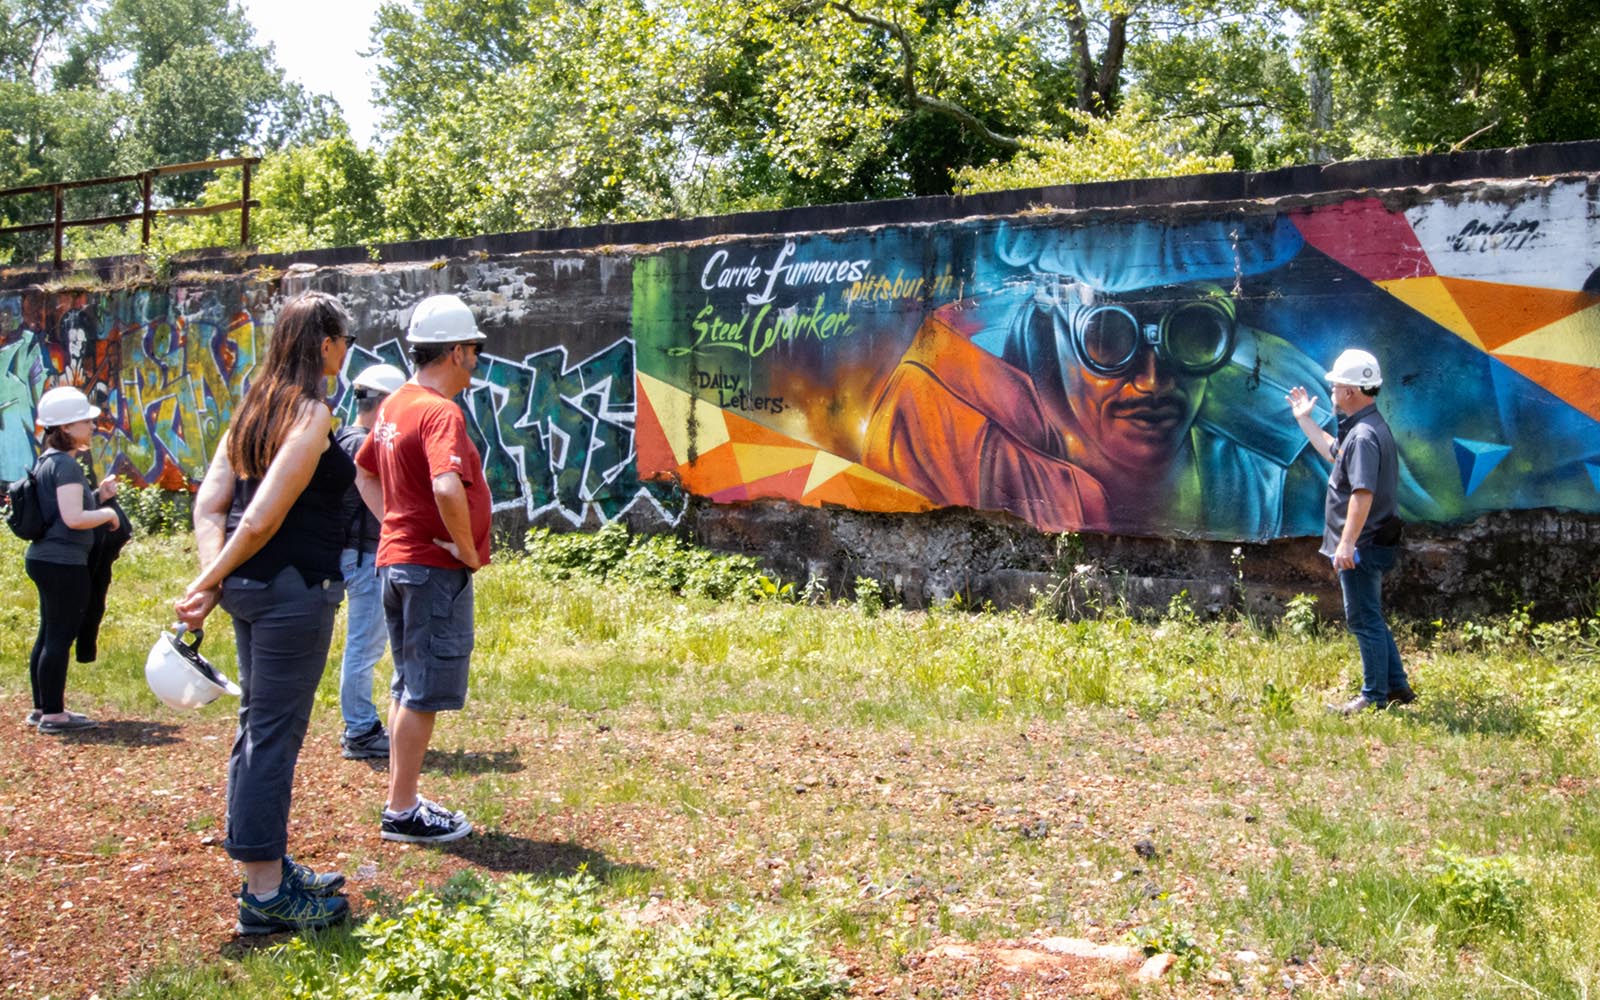 A tour guide gestures to a graffiti mural of a steelworker while guests view it.